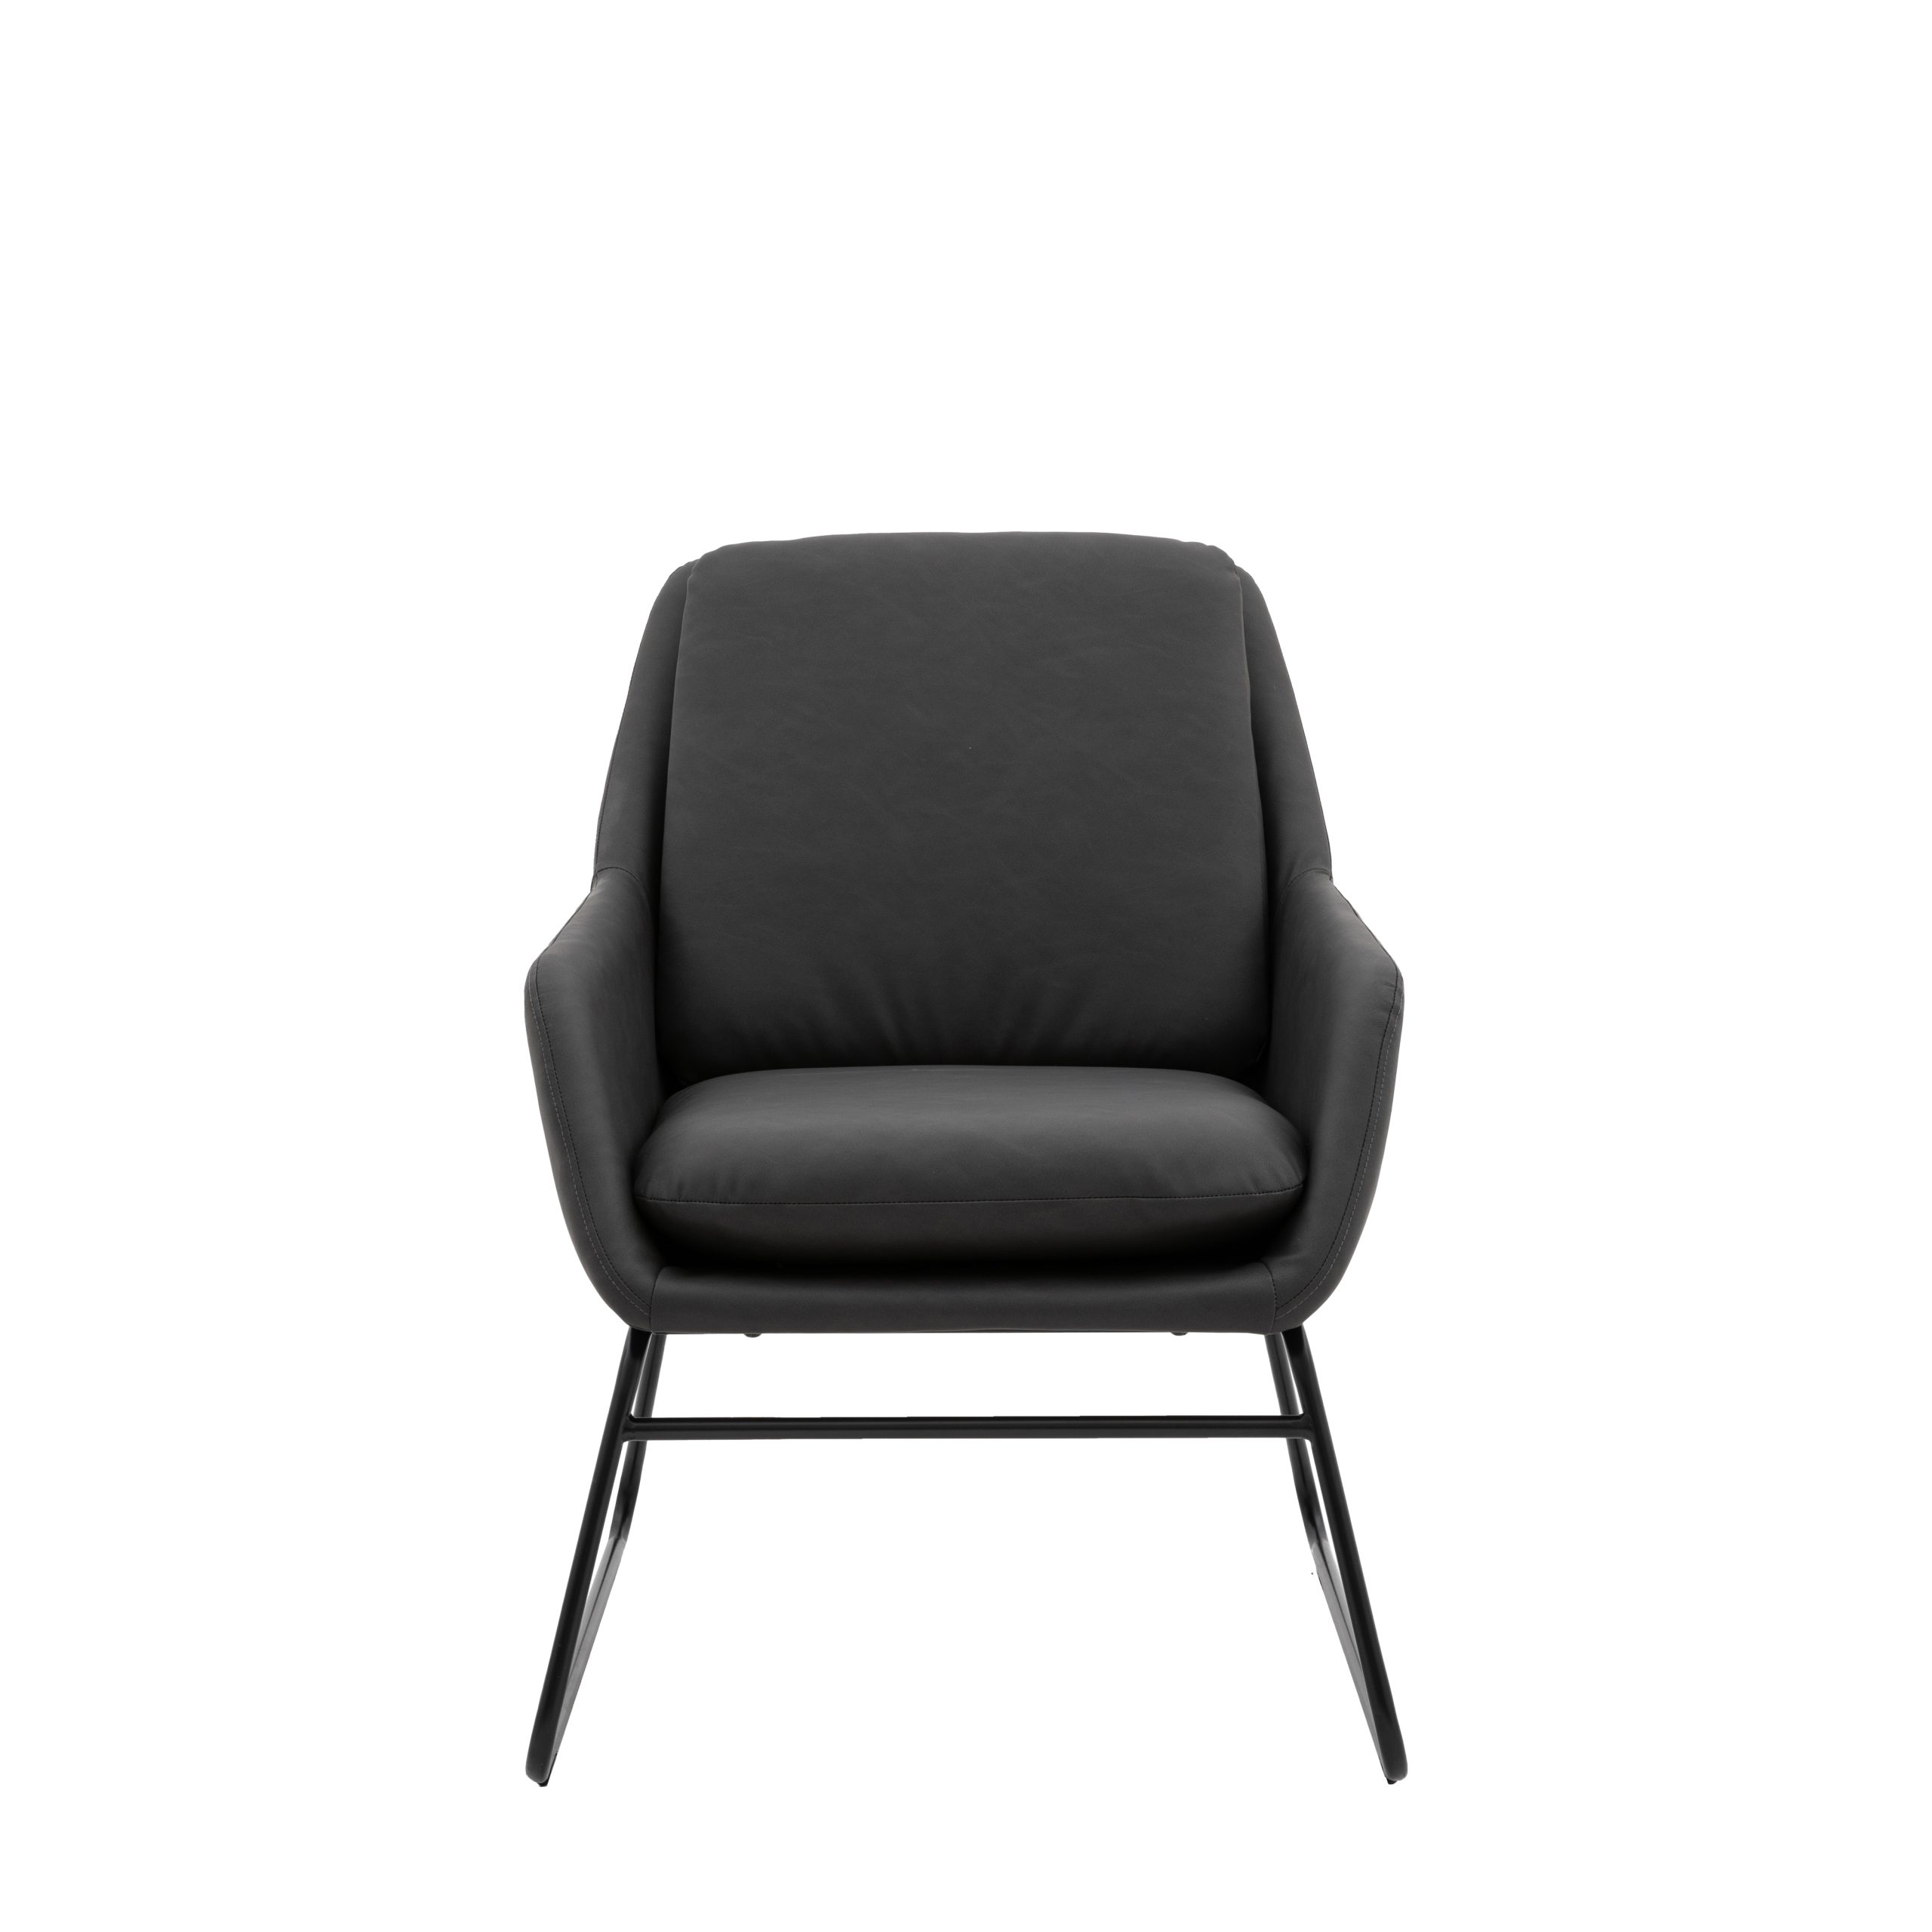 Gallery Direct Funton Chair Charcoal